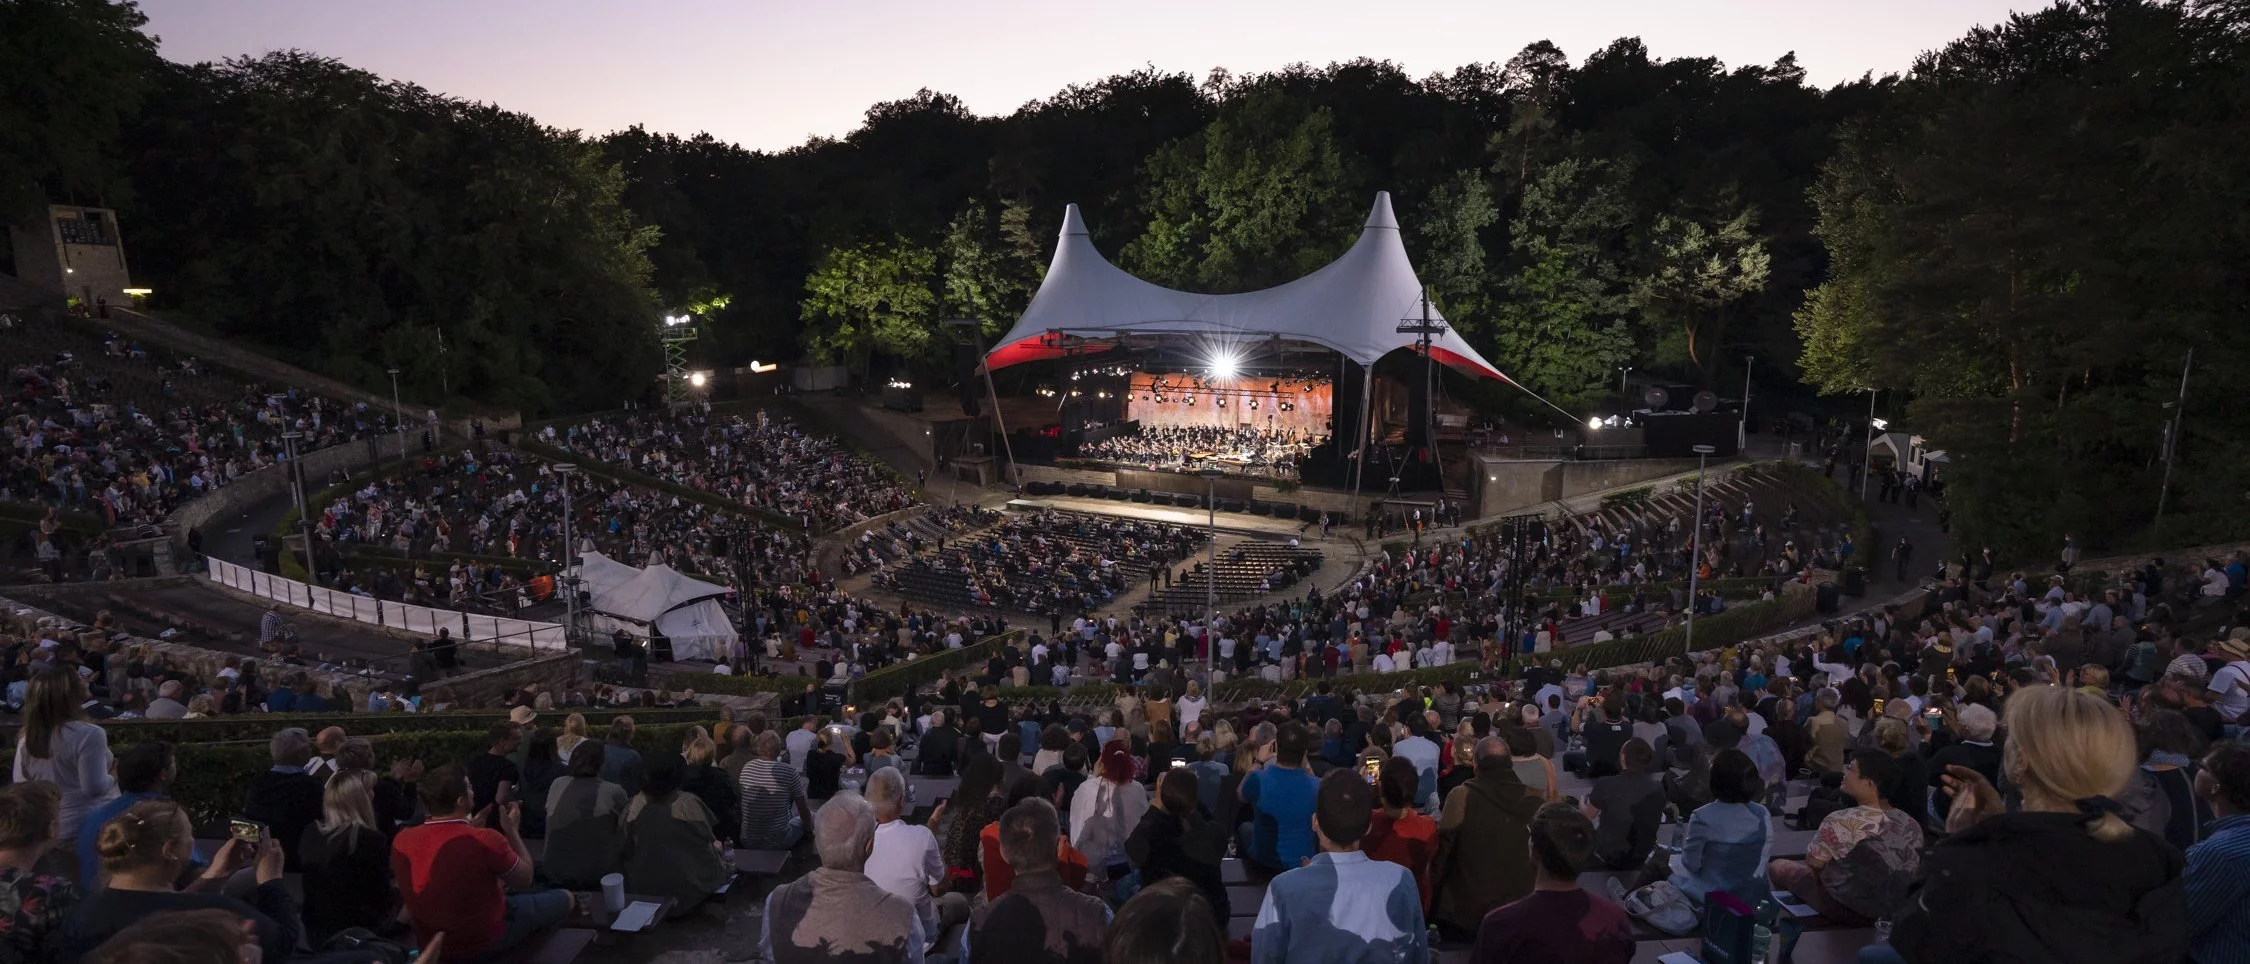 Stage of the Waldbühne at sunset